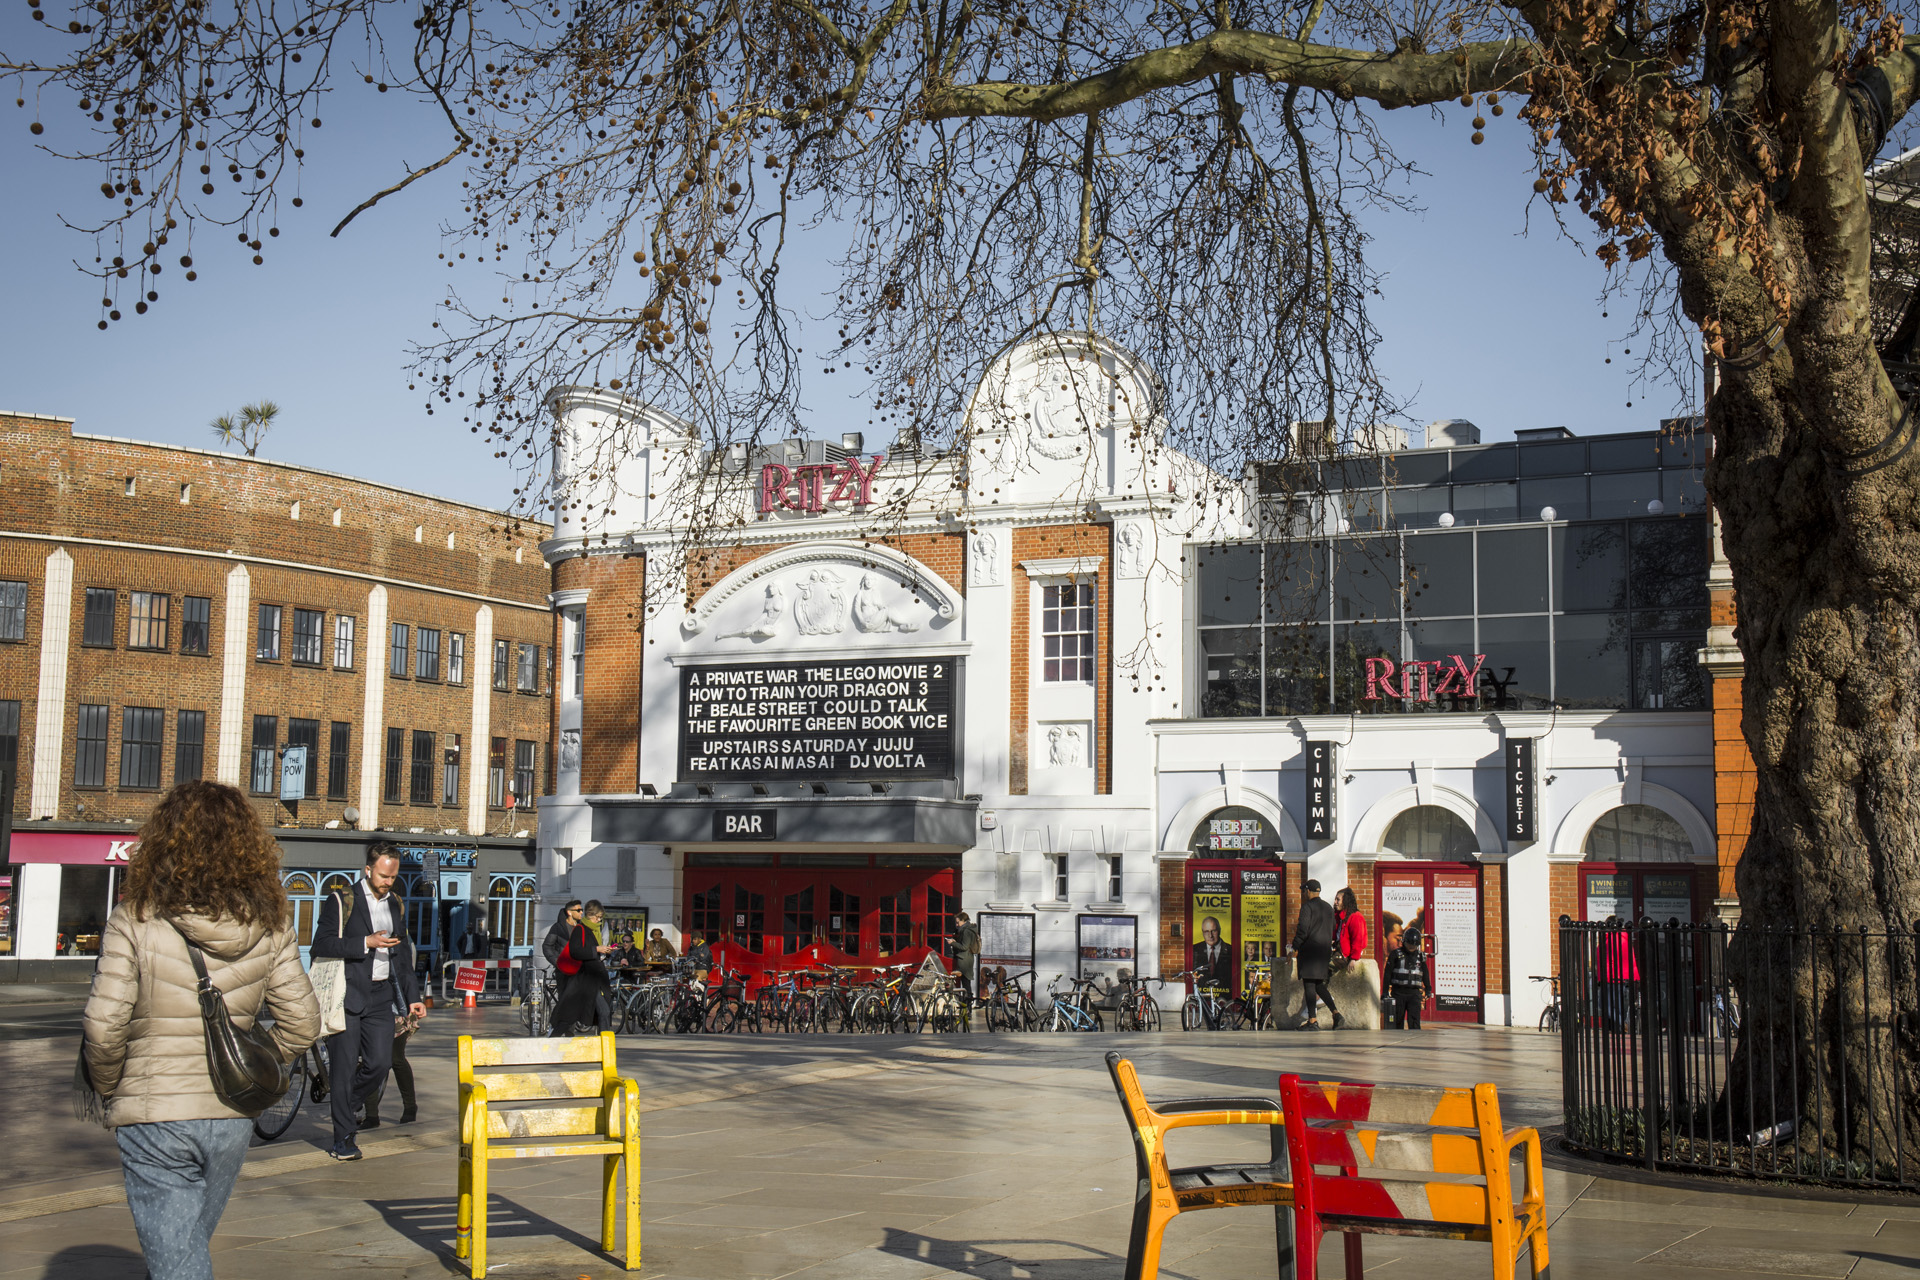 Brixton, UK- February, 2019: View of the Ritzy Picturehouse cinema in south west London, a prominent building with a bar and cafe